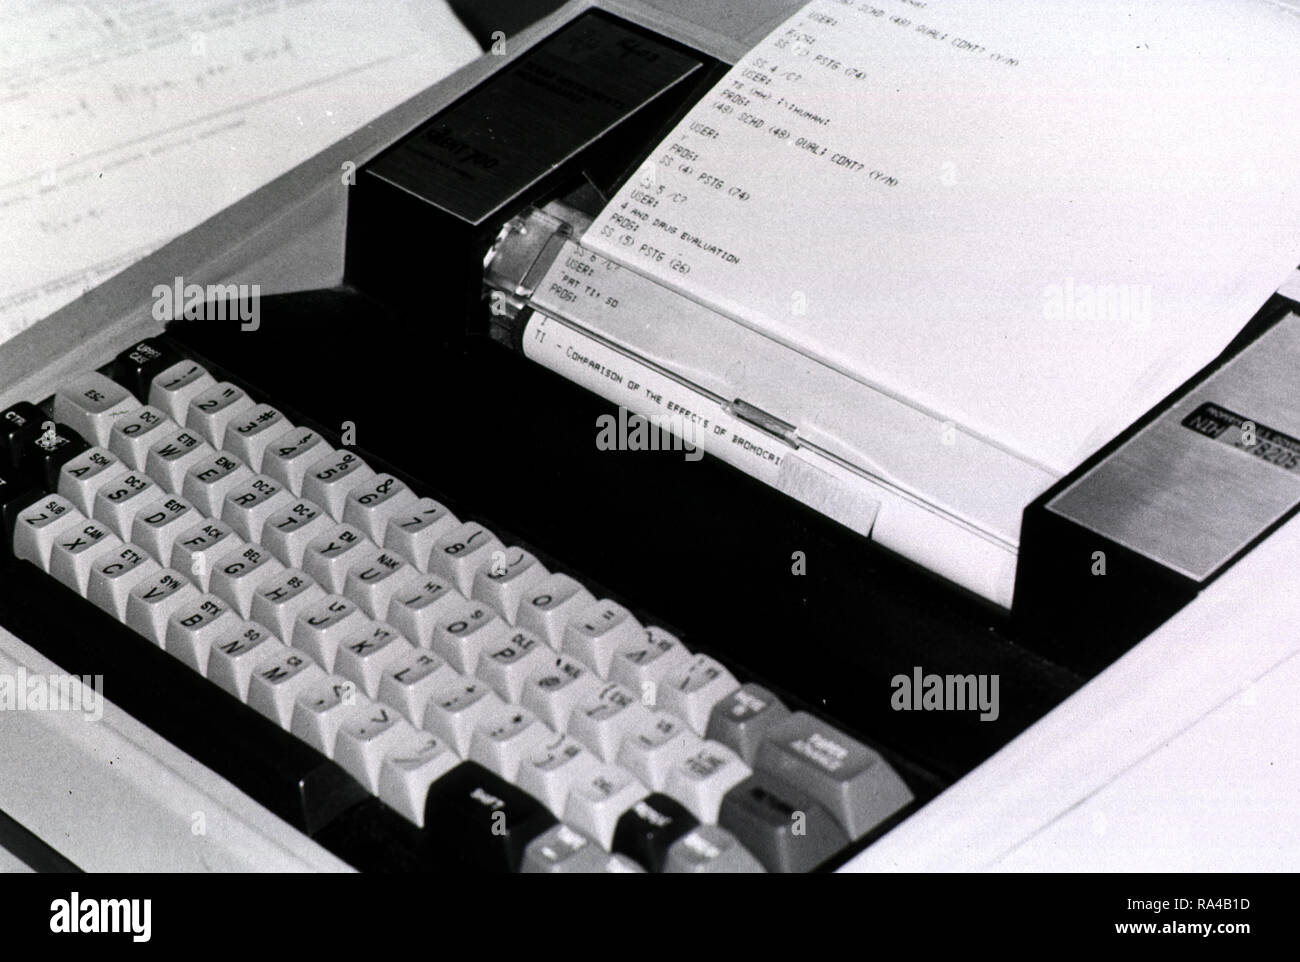 MEDLINE's Silent 700 by Texas Instruments ca. 1977 Stock Photo